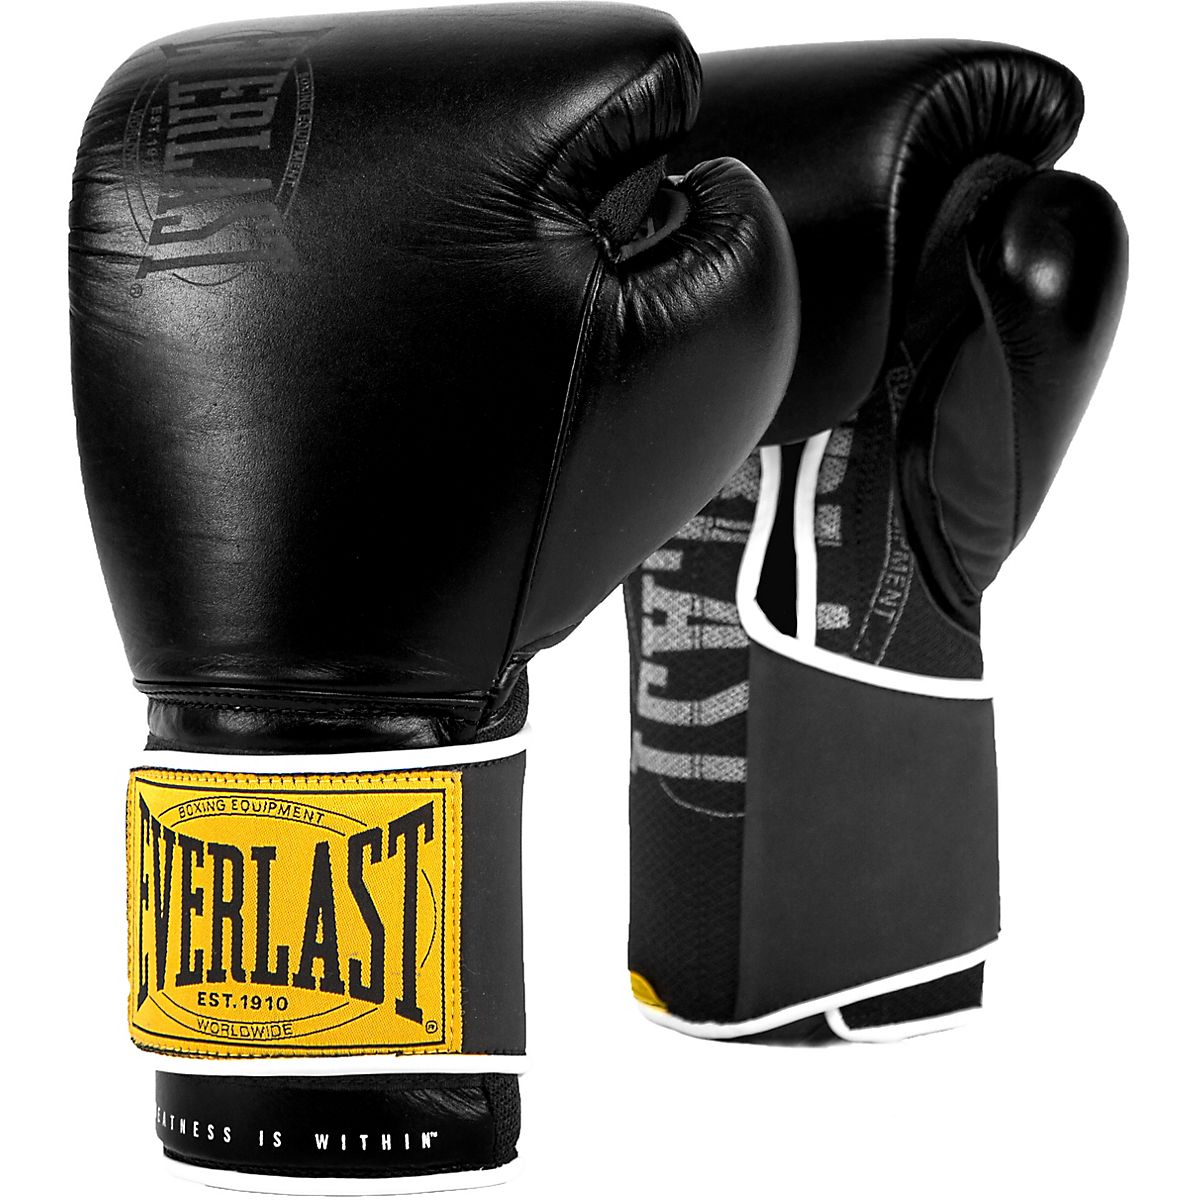 2 Hand Wraps Boxing MMA Sport Gym Fitness Everlast Ping for sale online 